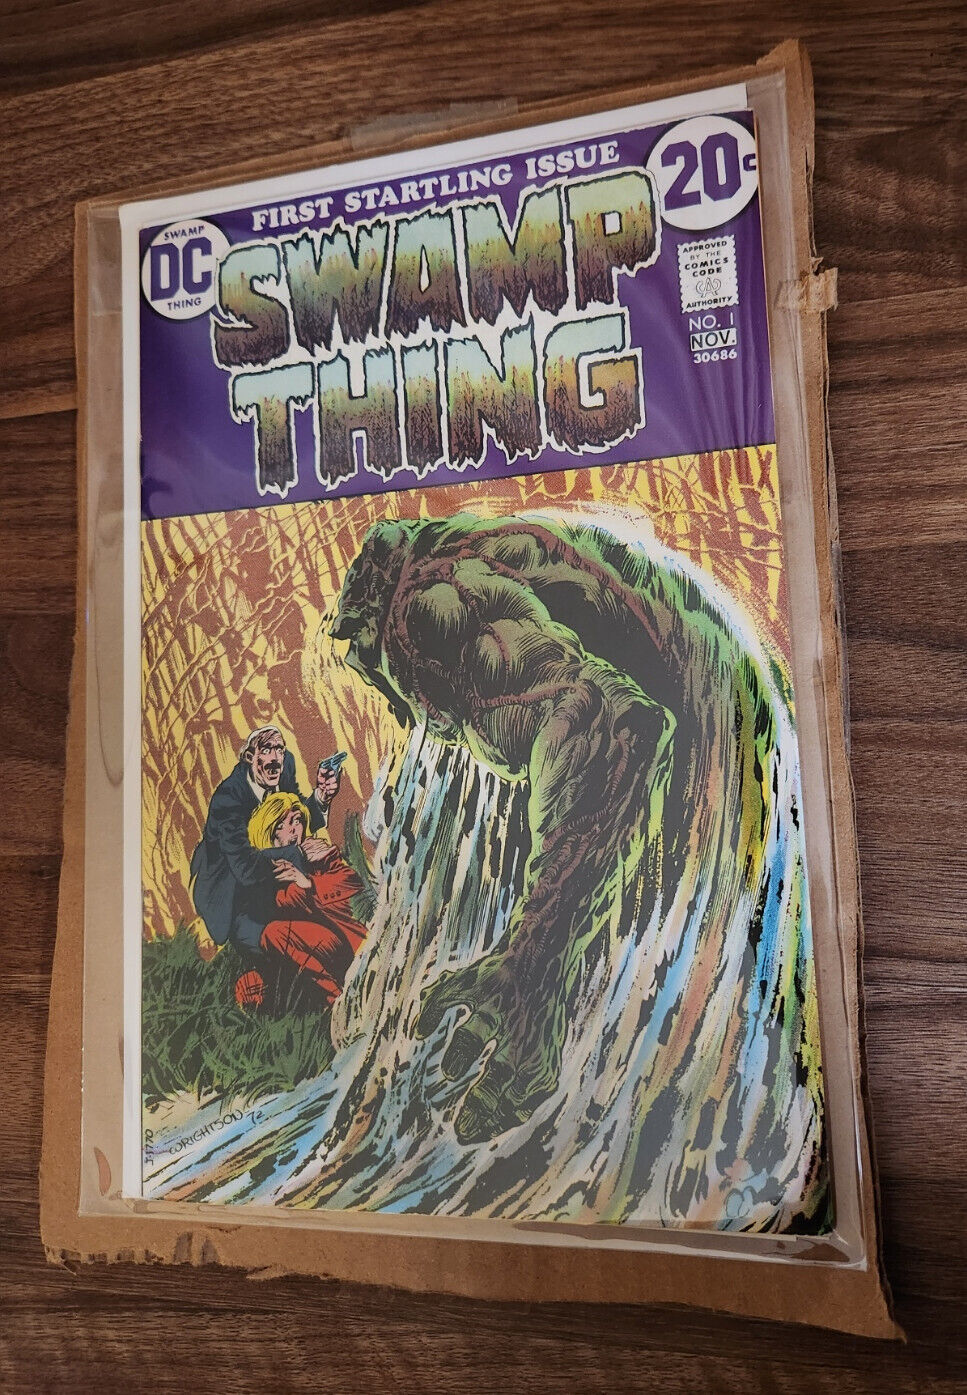 Swamp DC Thing Comic # 1 UNGRADED - DELISITING JUNE